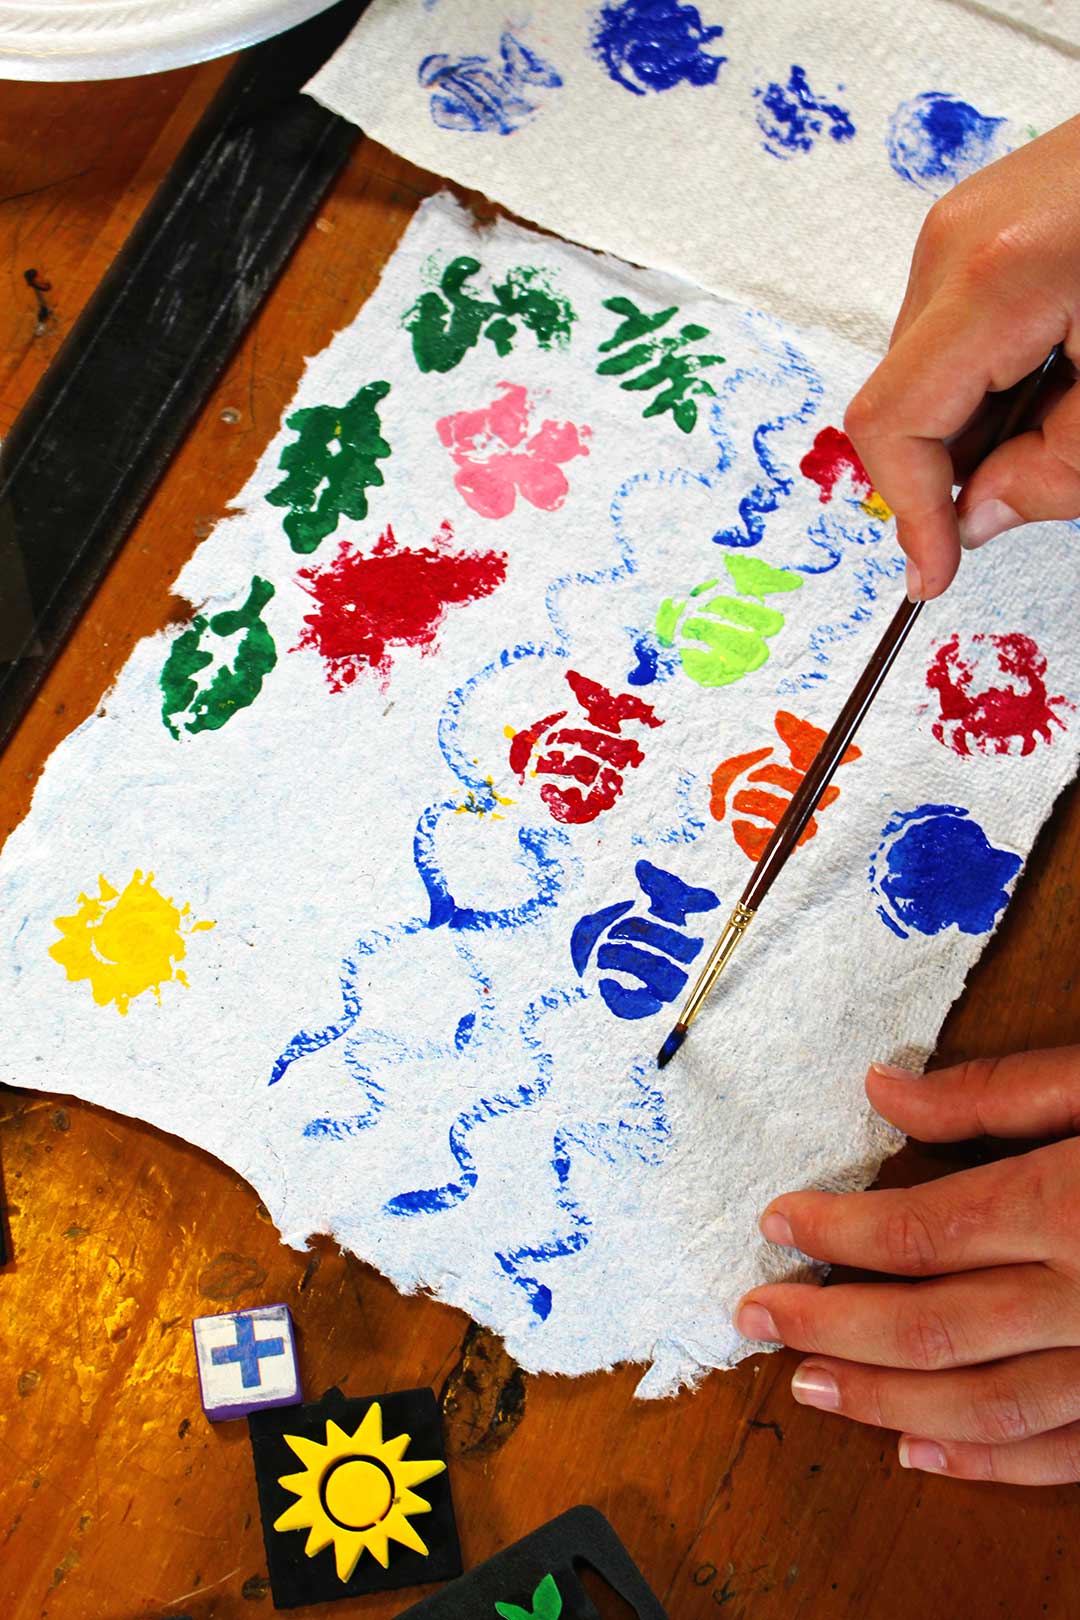 Homemade paper on wooden table. Child's hands painting water on stamped painting of fish.